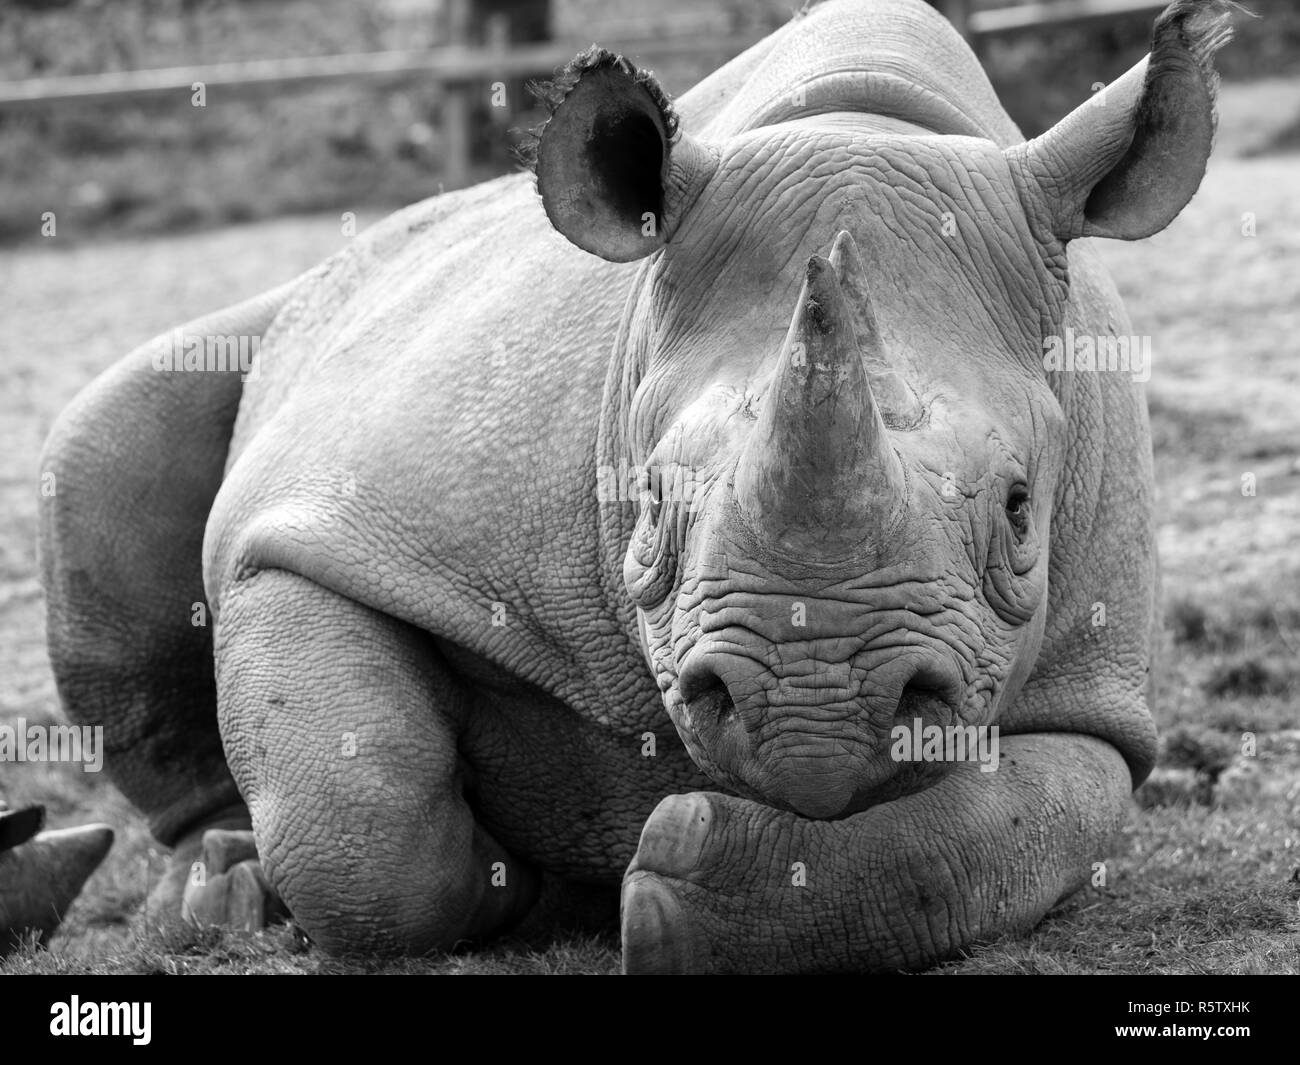 Close up of East African black rhinoceros looking straight to camera. Photographed in monochrome at Port Lympne Safari Park near Ashford Kent UK. Stock Photo